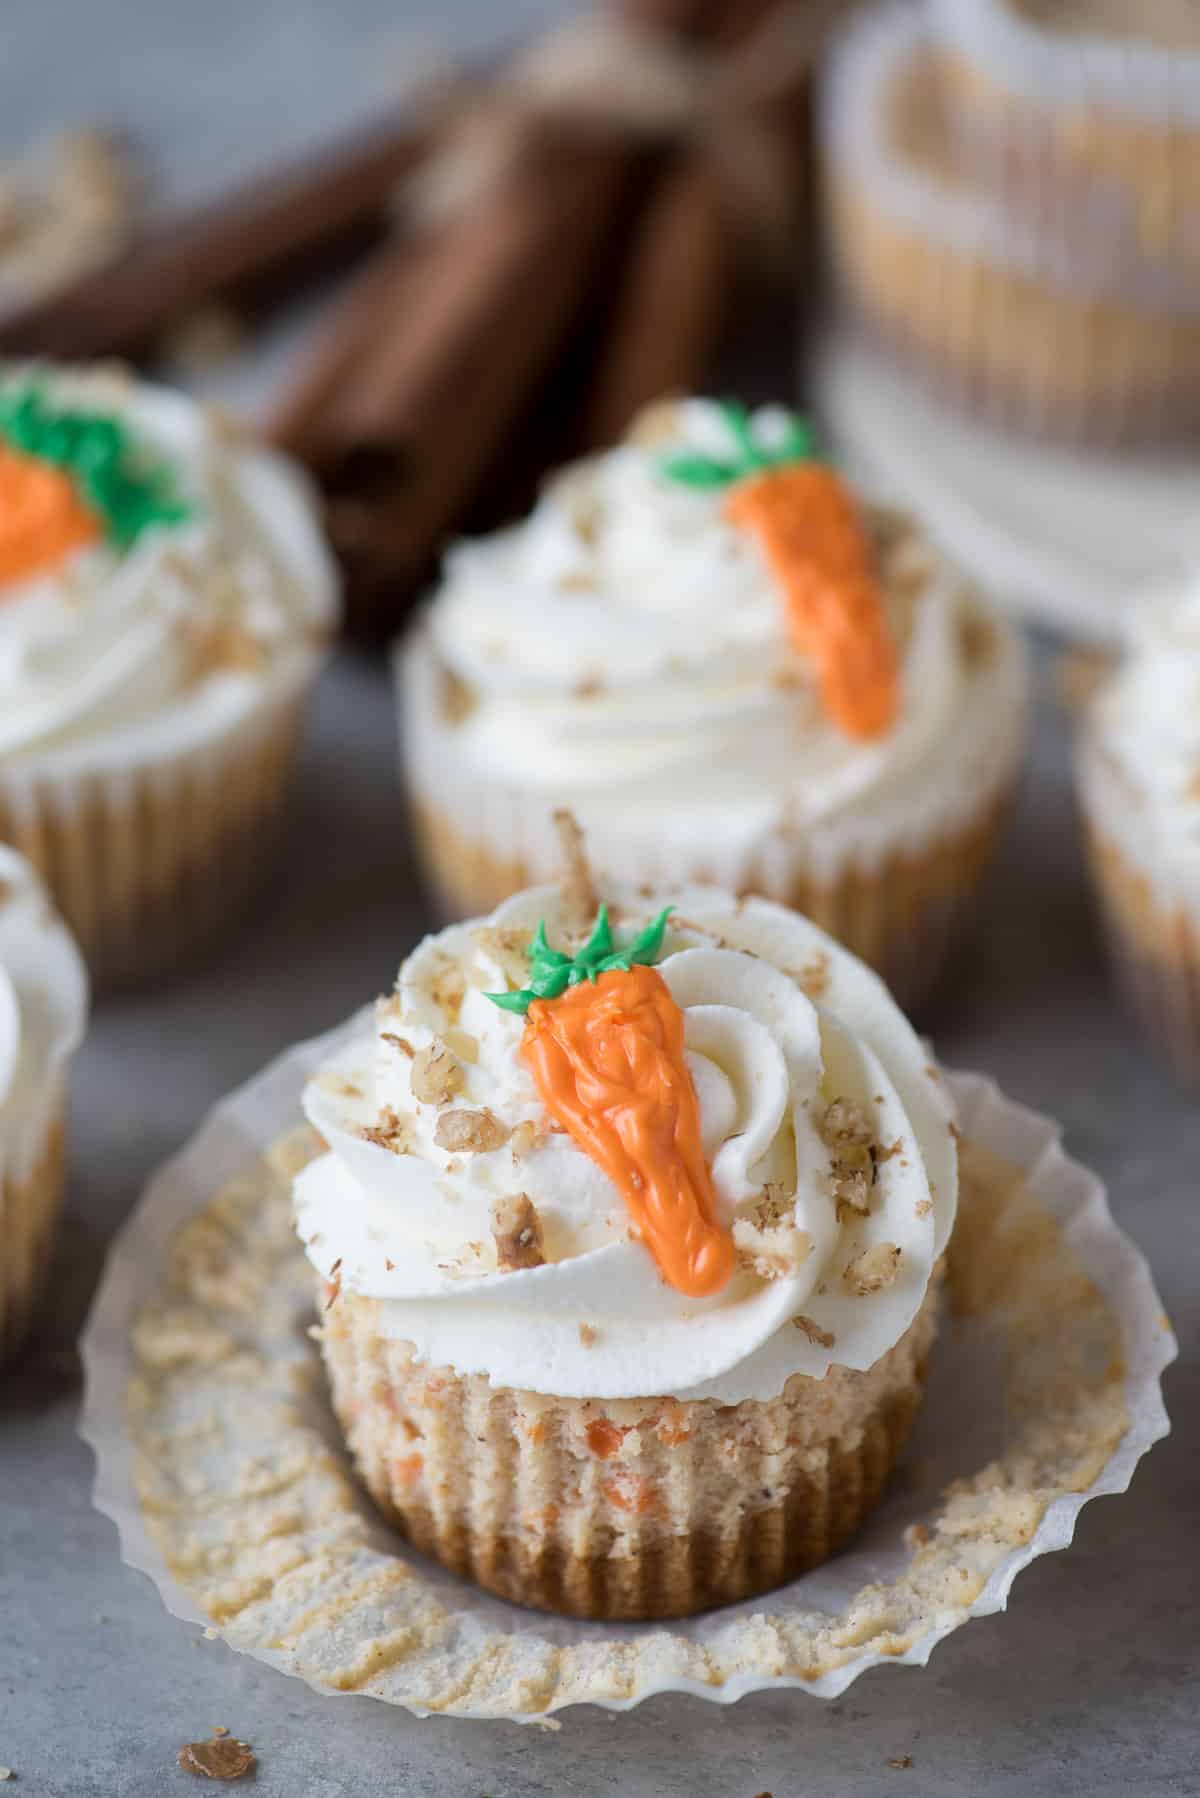 mini carrot cheesecake with frosting carrot on top